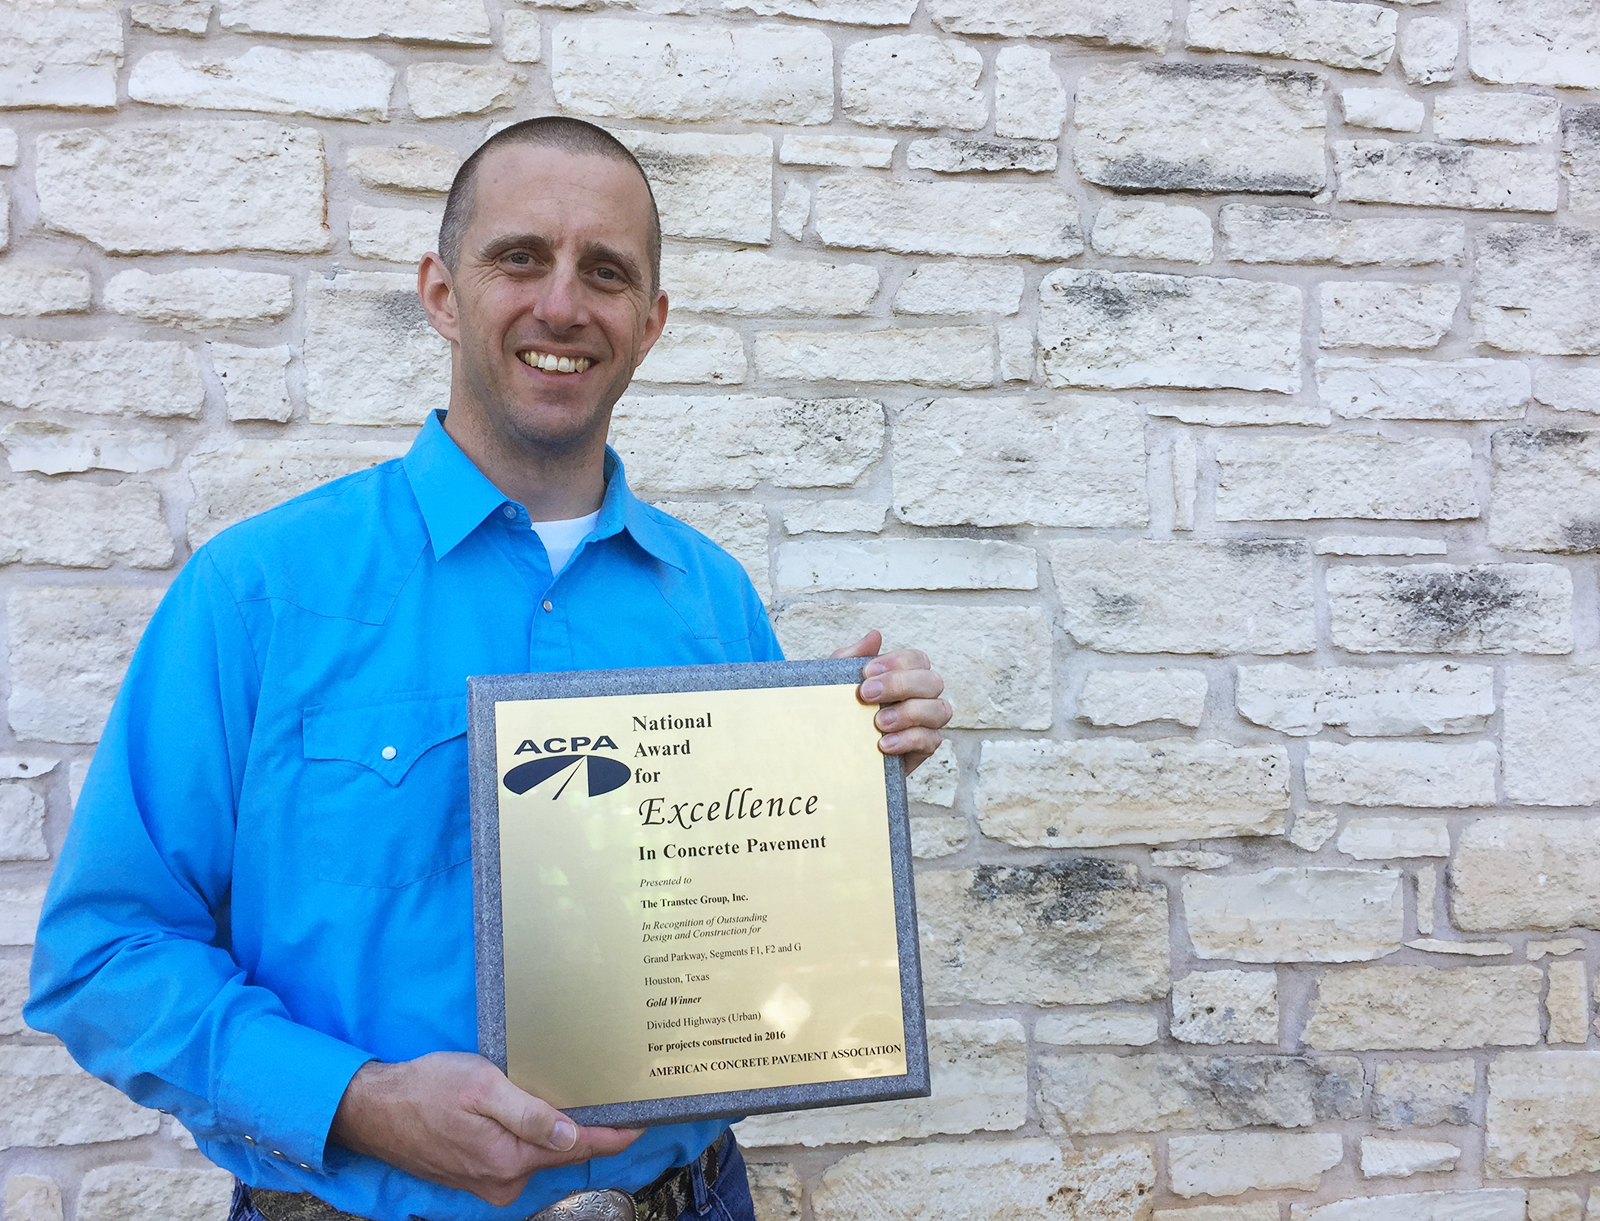 The Transtec Group is a Gold Winner of the American Concrete Pavement Association’s National Award for Excellence in Concrete Pavement.